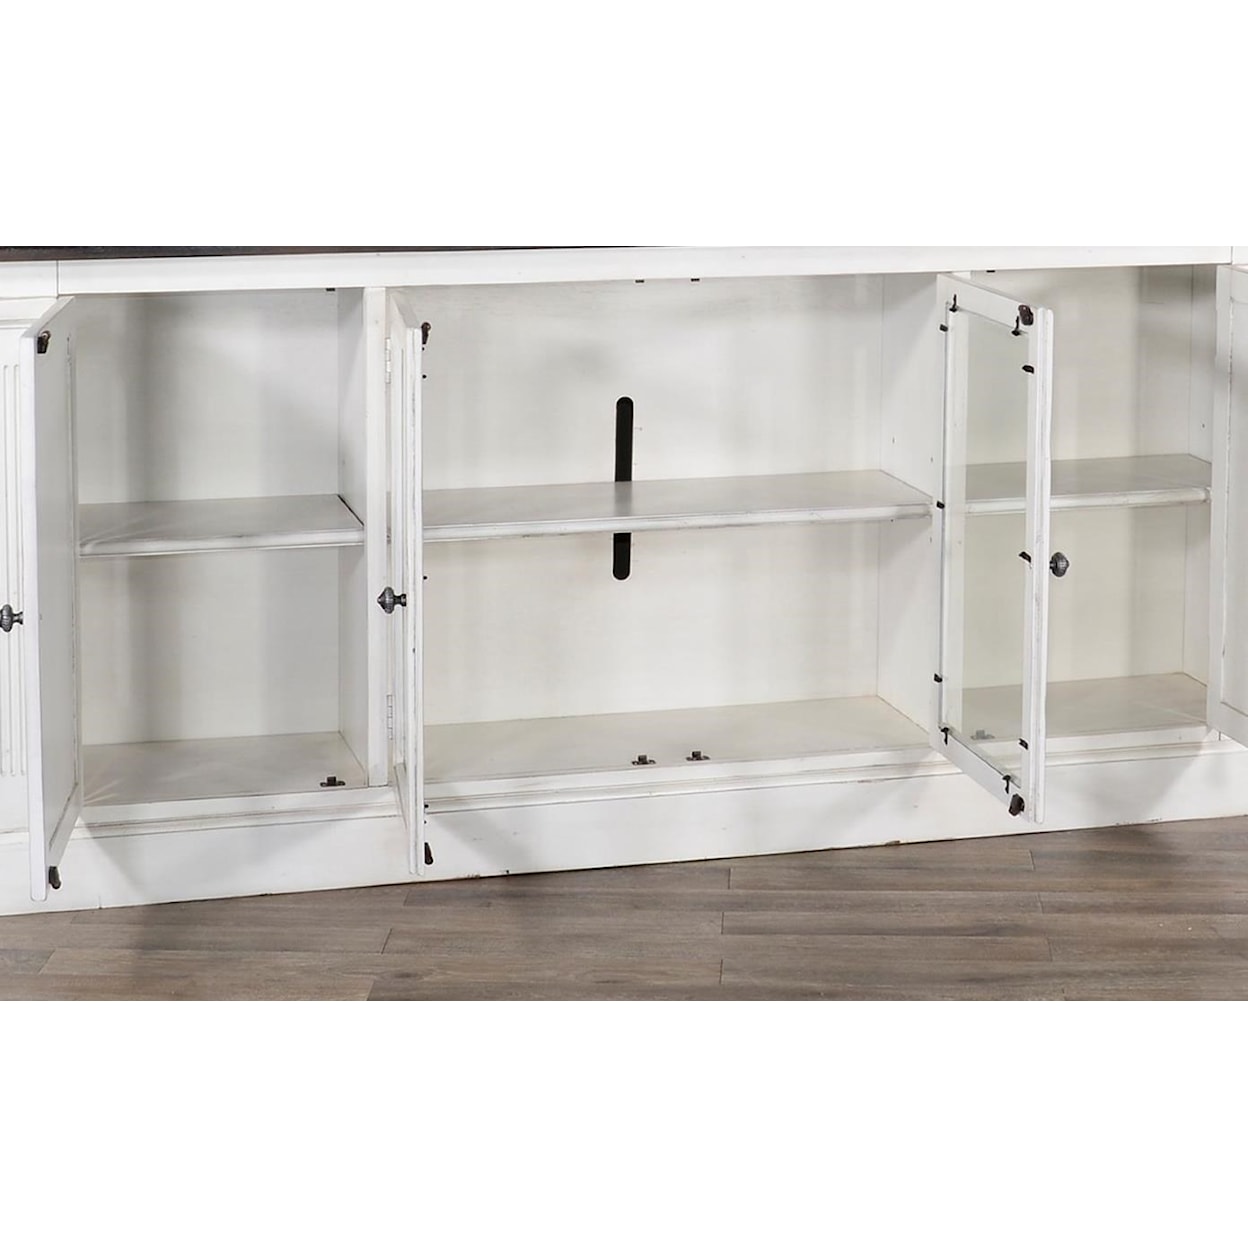 Sunny Designs Carriage House Media Console